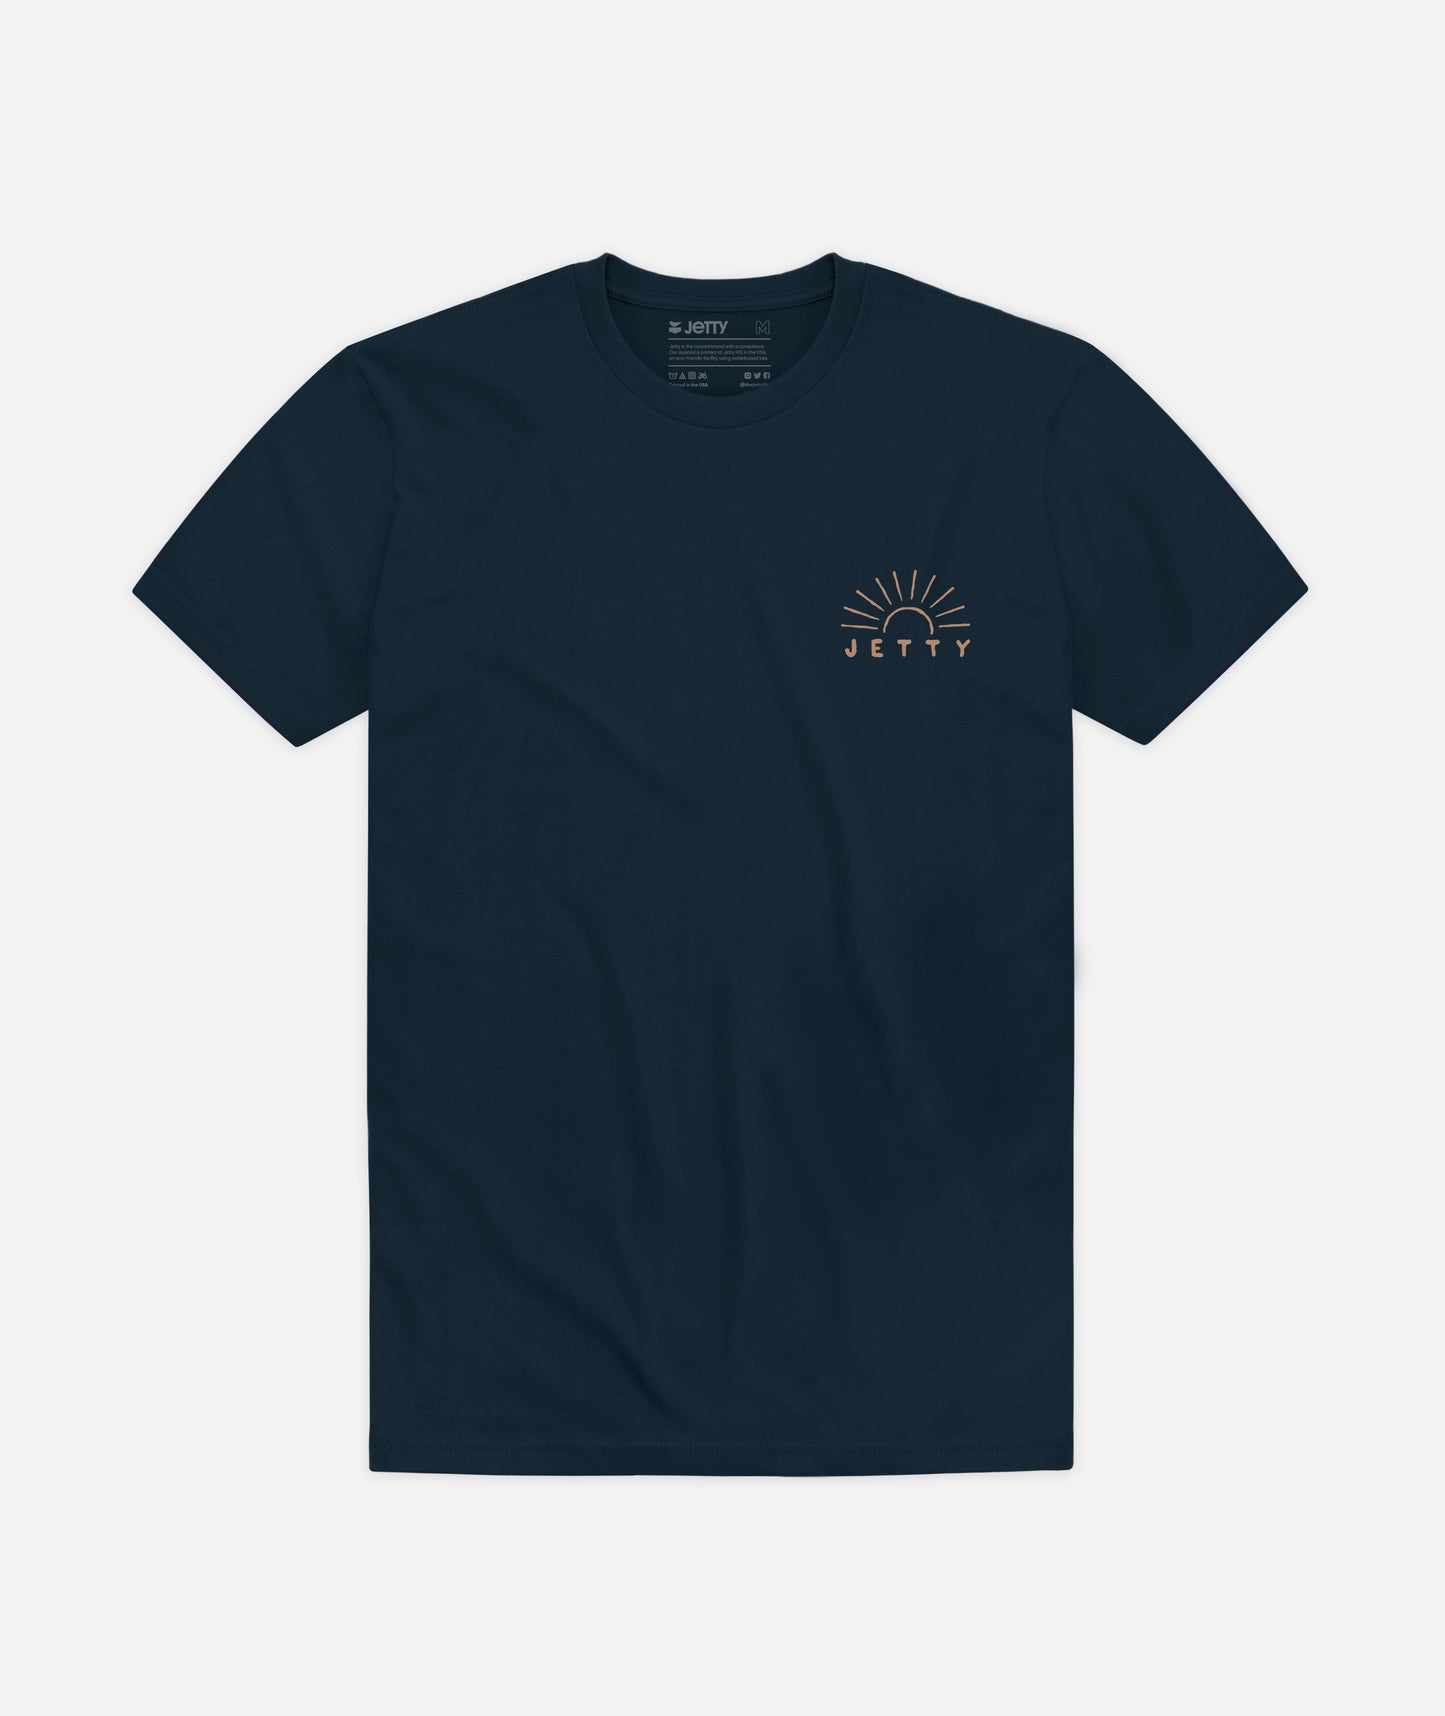 Tails Tee - Navy